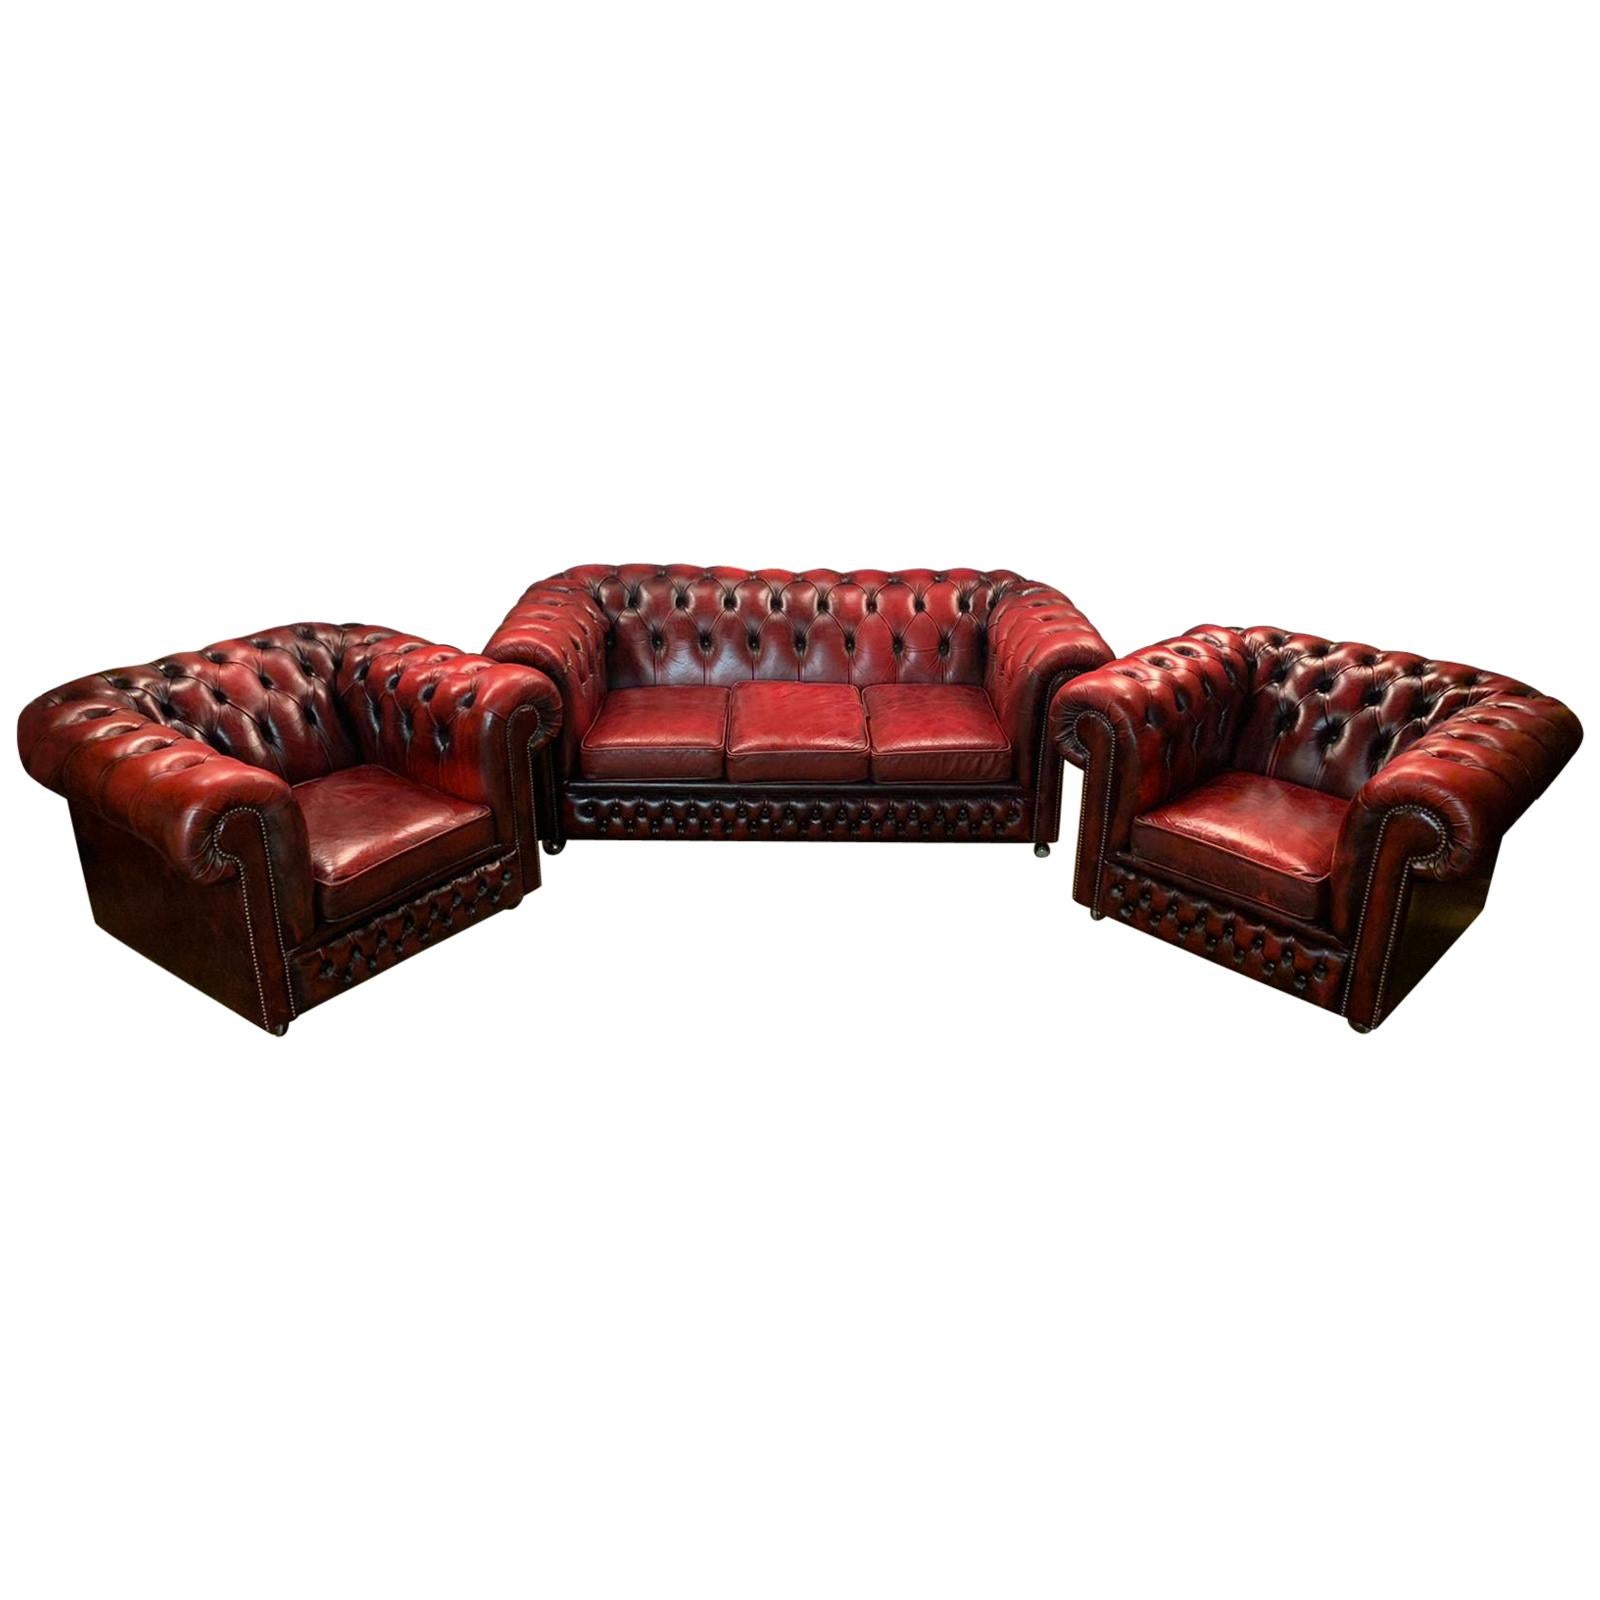 Original Chesterfield Set Three-Seat Sofa and 2 Armchairs in Bordeaux